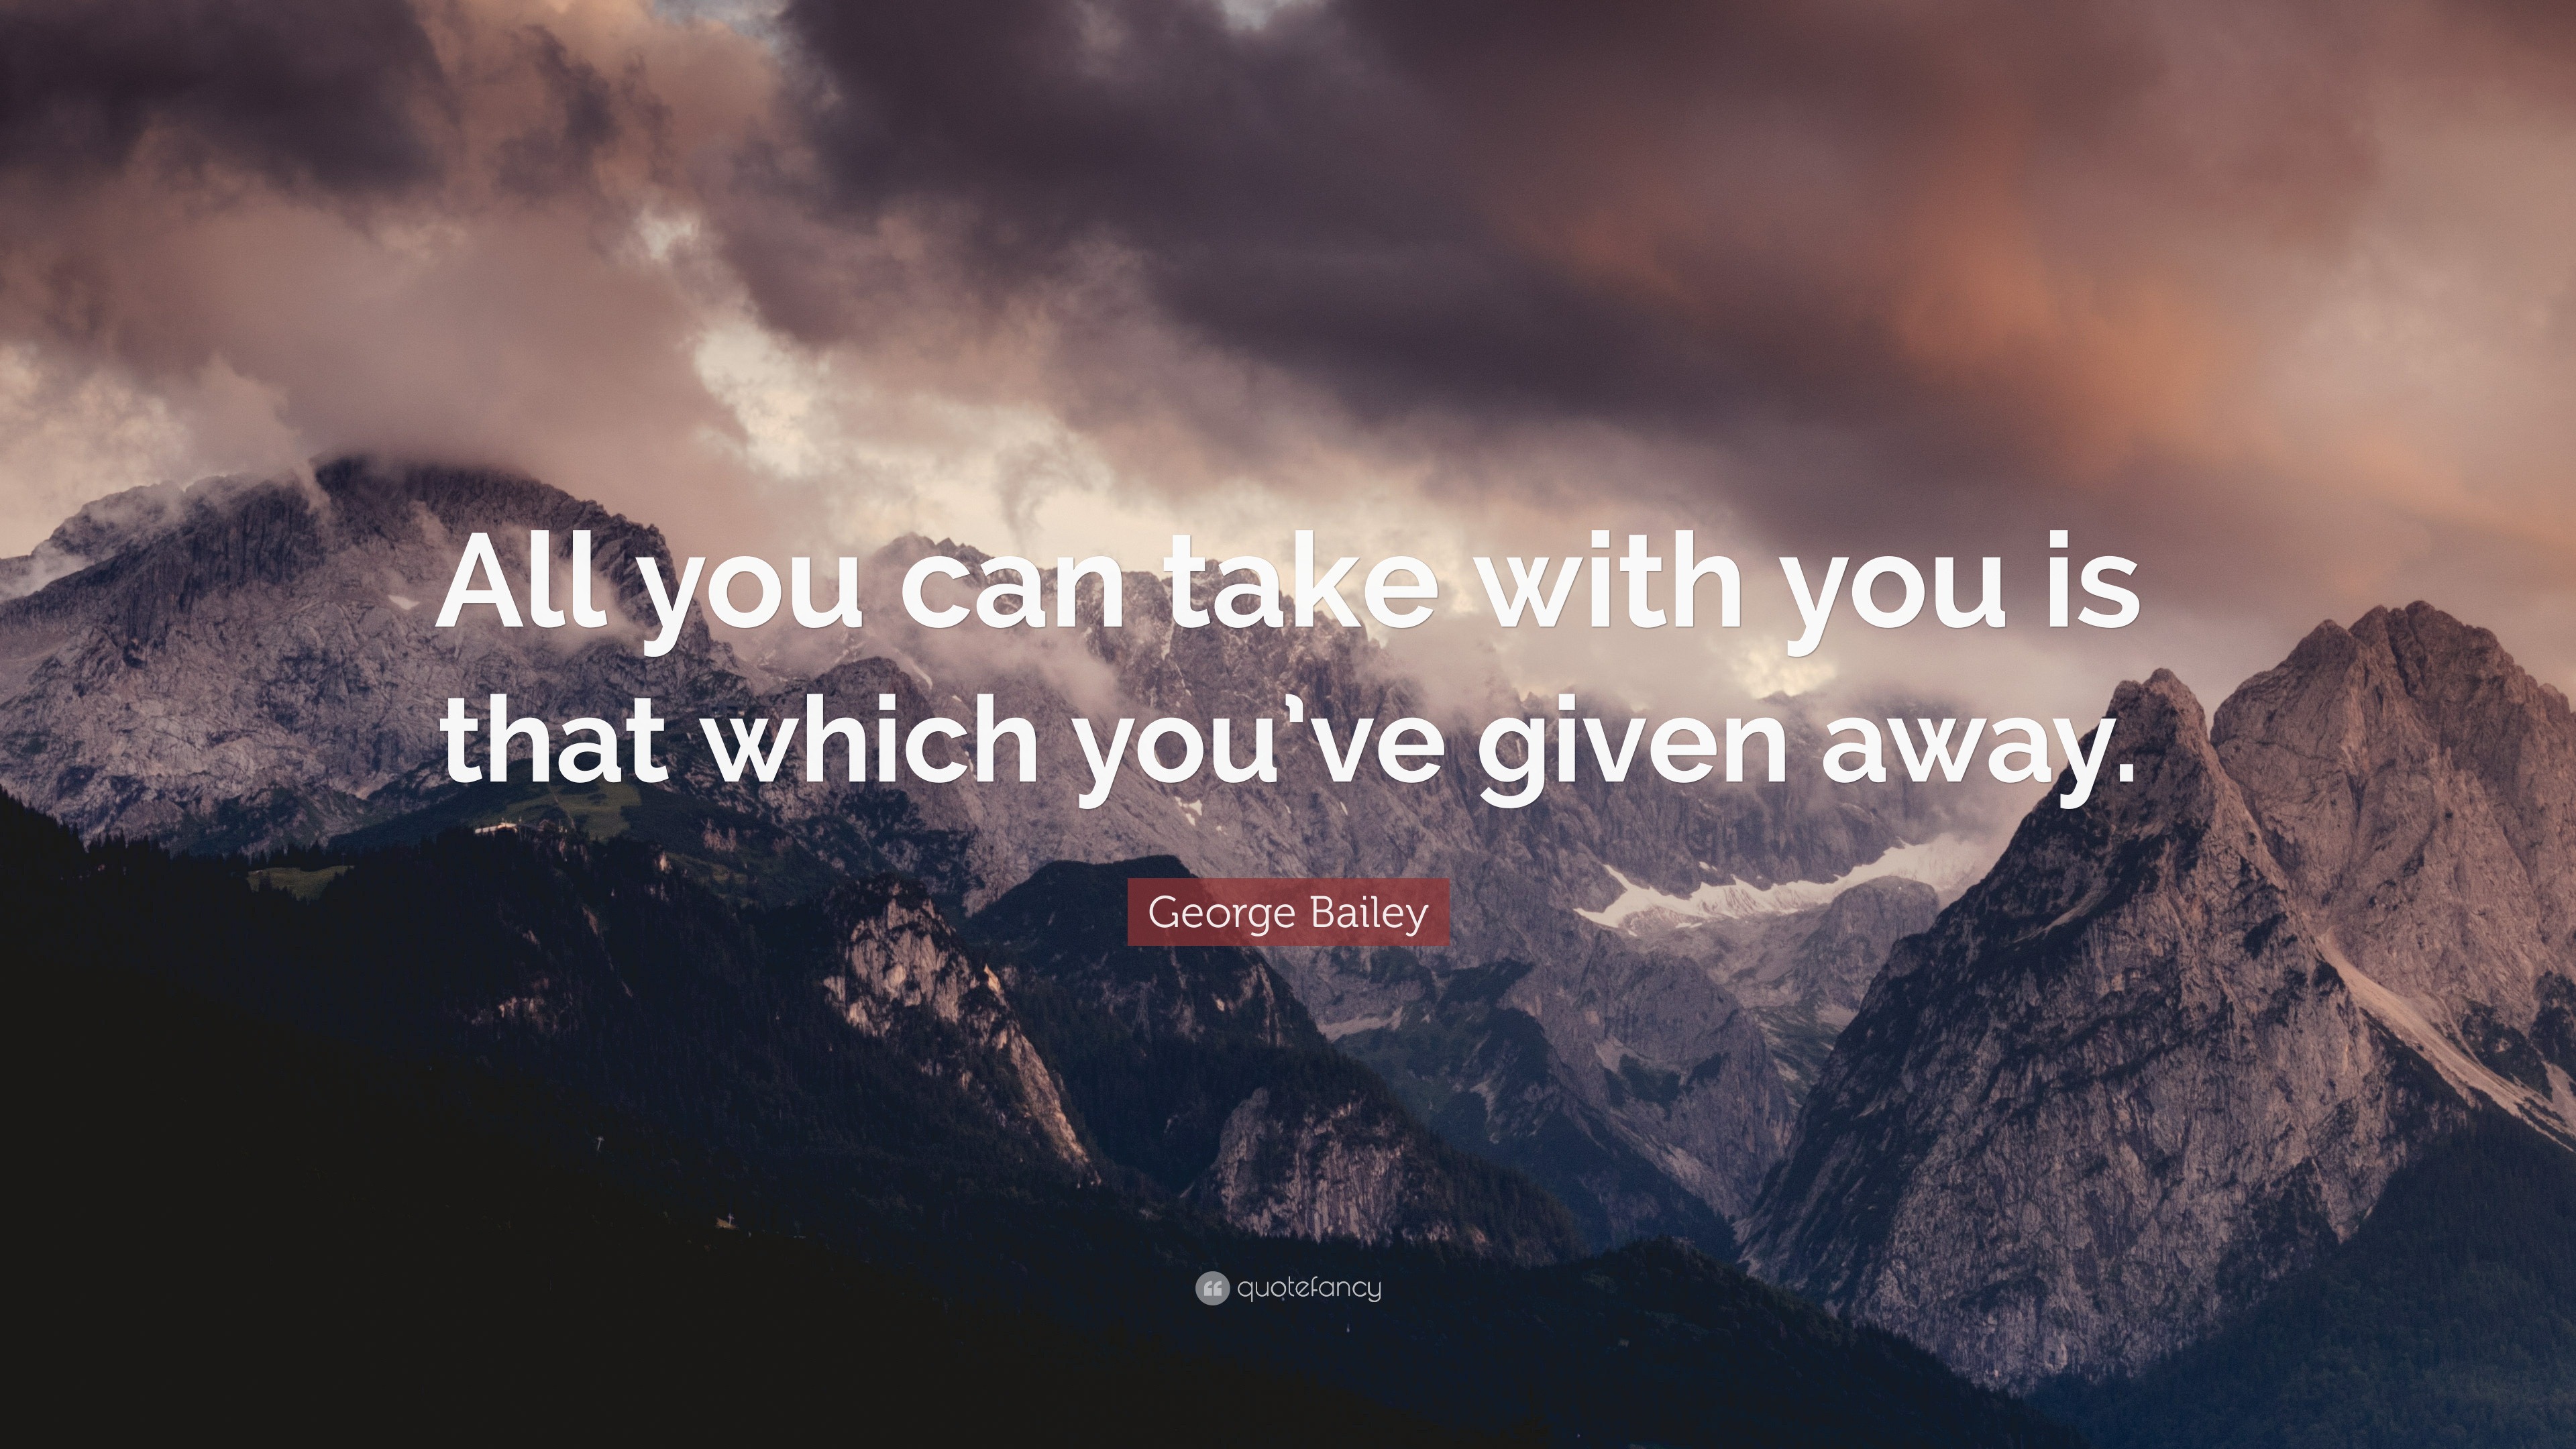 George Bailey Quote: “All you can take with you is that which you’ve ...